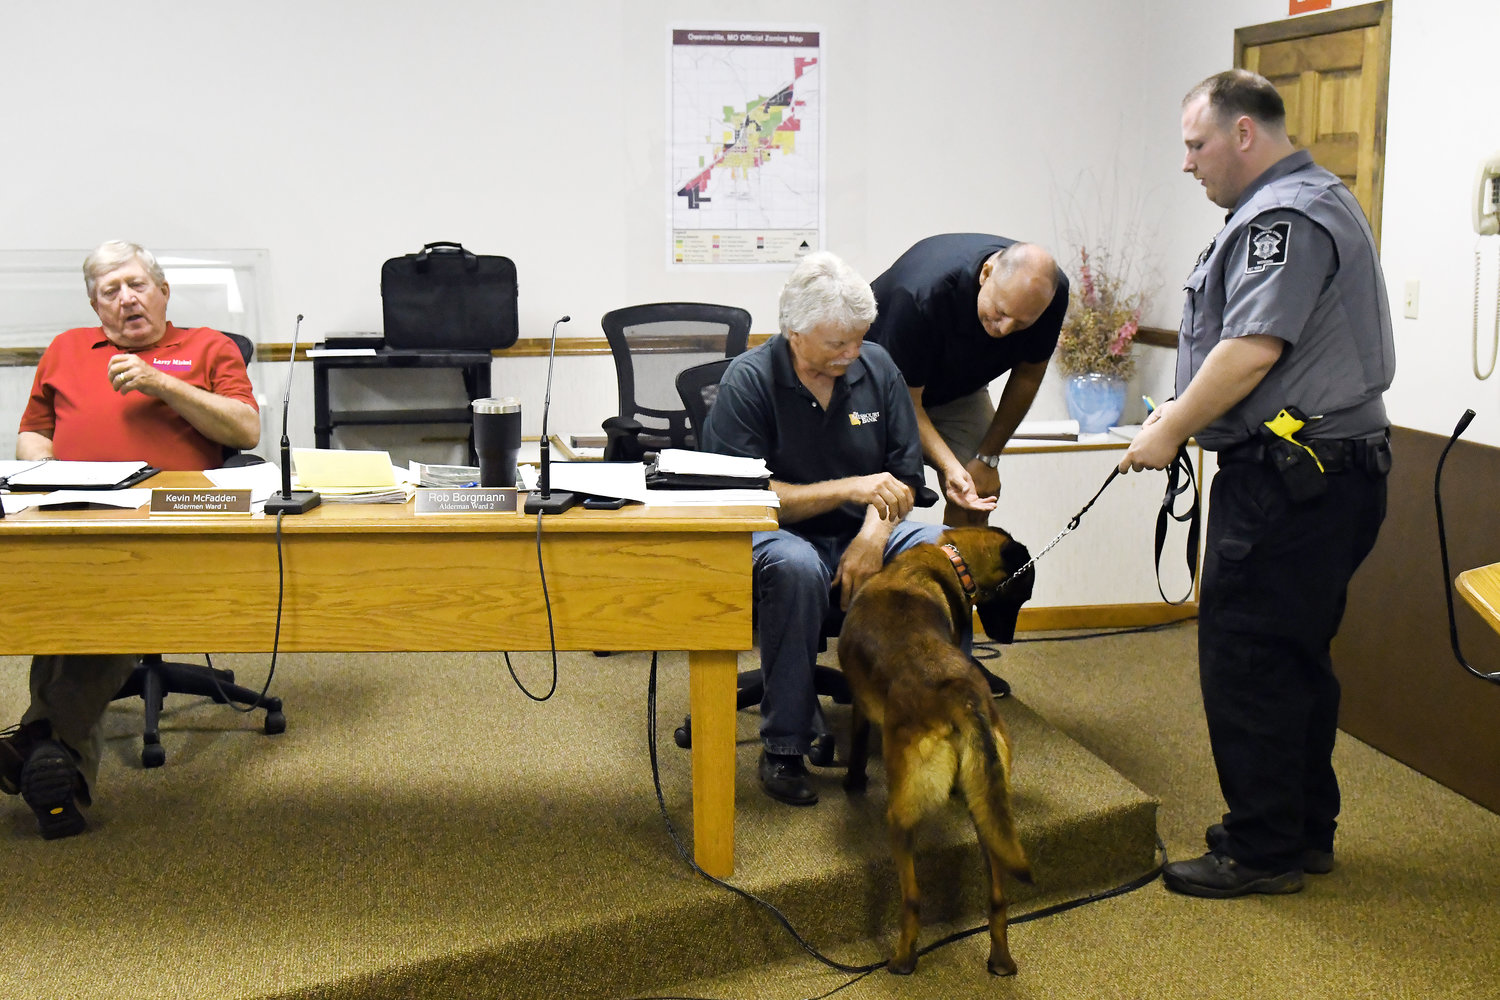 COMMISSION MEMBERS Jim Holland (seated) and Jerry Lairmore greet the sheriff’s patrol’s newest addition, K-9 unit “Raffa” and the dog’s handler, Deputy Joe Lynch. Presiding Commissioner Larry Miskel is seated on the left. Brian Dowdy, a retired lawman operating “Dogs on Duty” in Troy, Mo., trains and donates police K-9s.